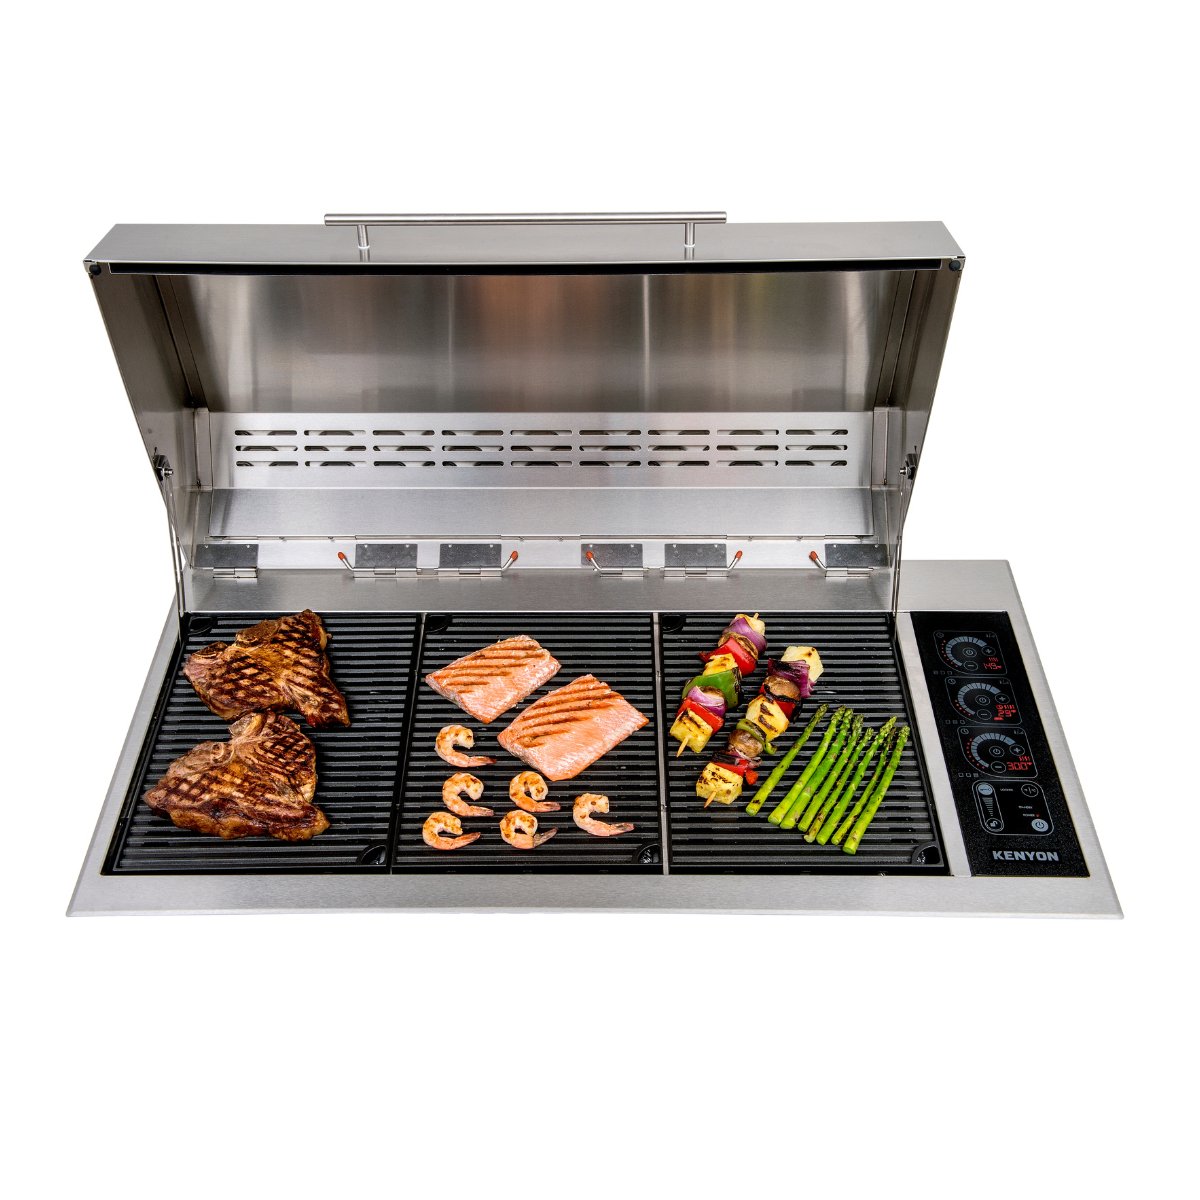 Kenyon Big American Built-In Electric Grill - Kitchen In The Garden